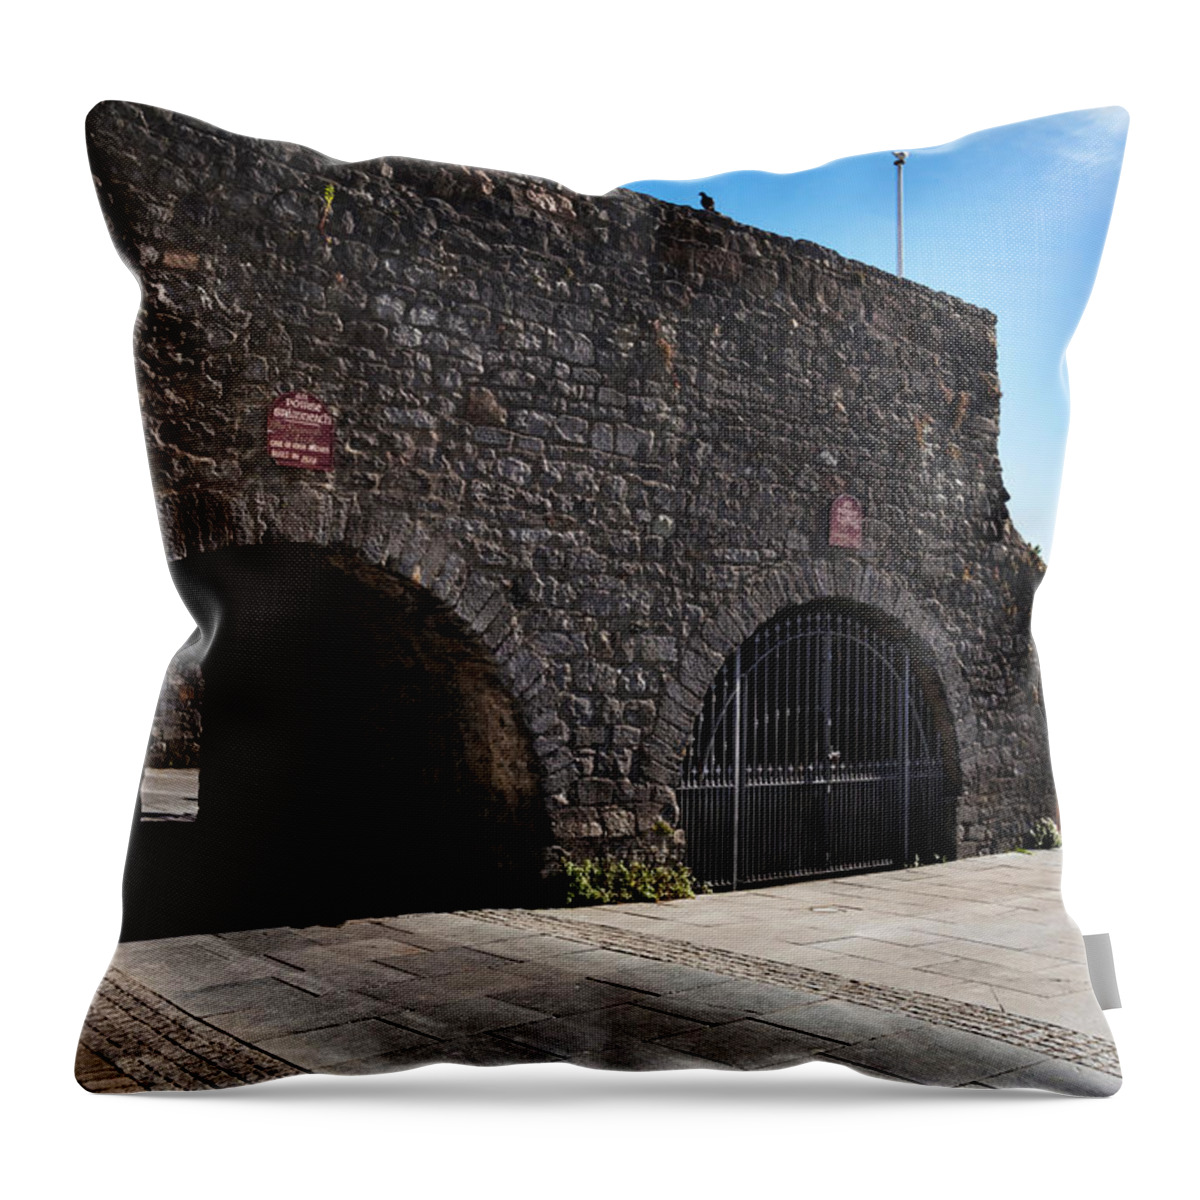 Photography Throw Pillow featuring the photograph The Spanish Arch, Galway City, Ireland by Panoramic Images